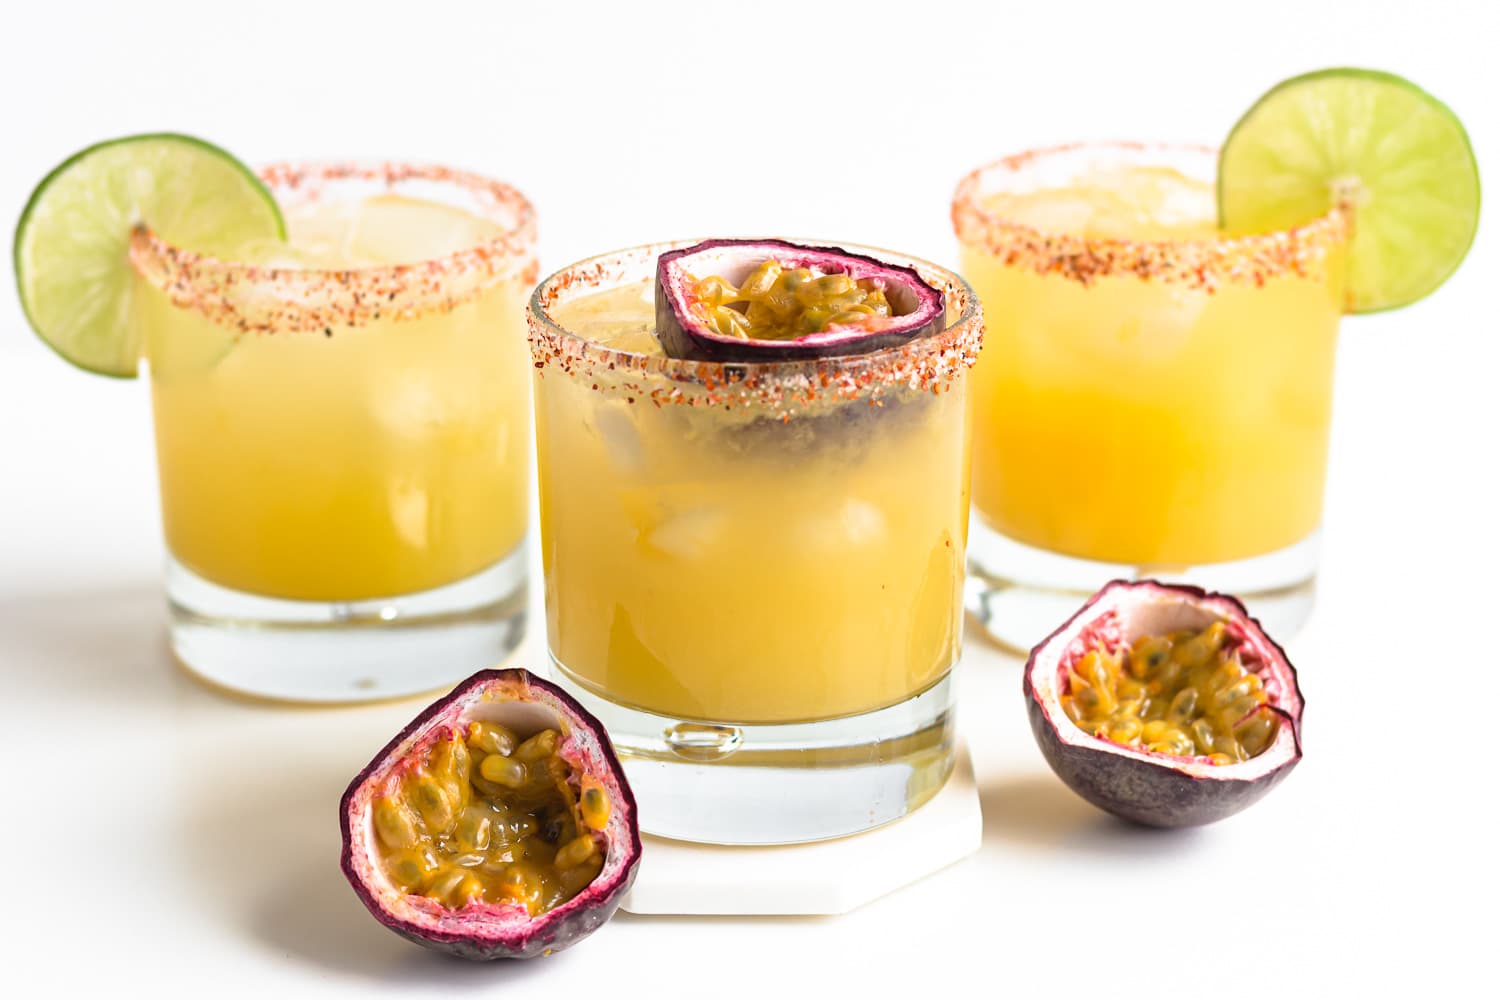 Three passion fruit cocktails garnished with lime slices and passion fruit halves.